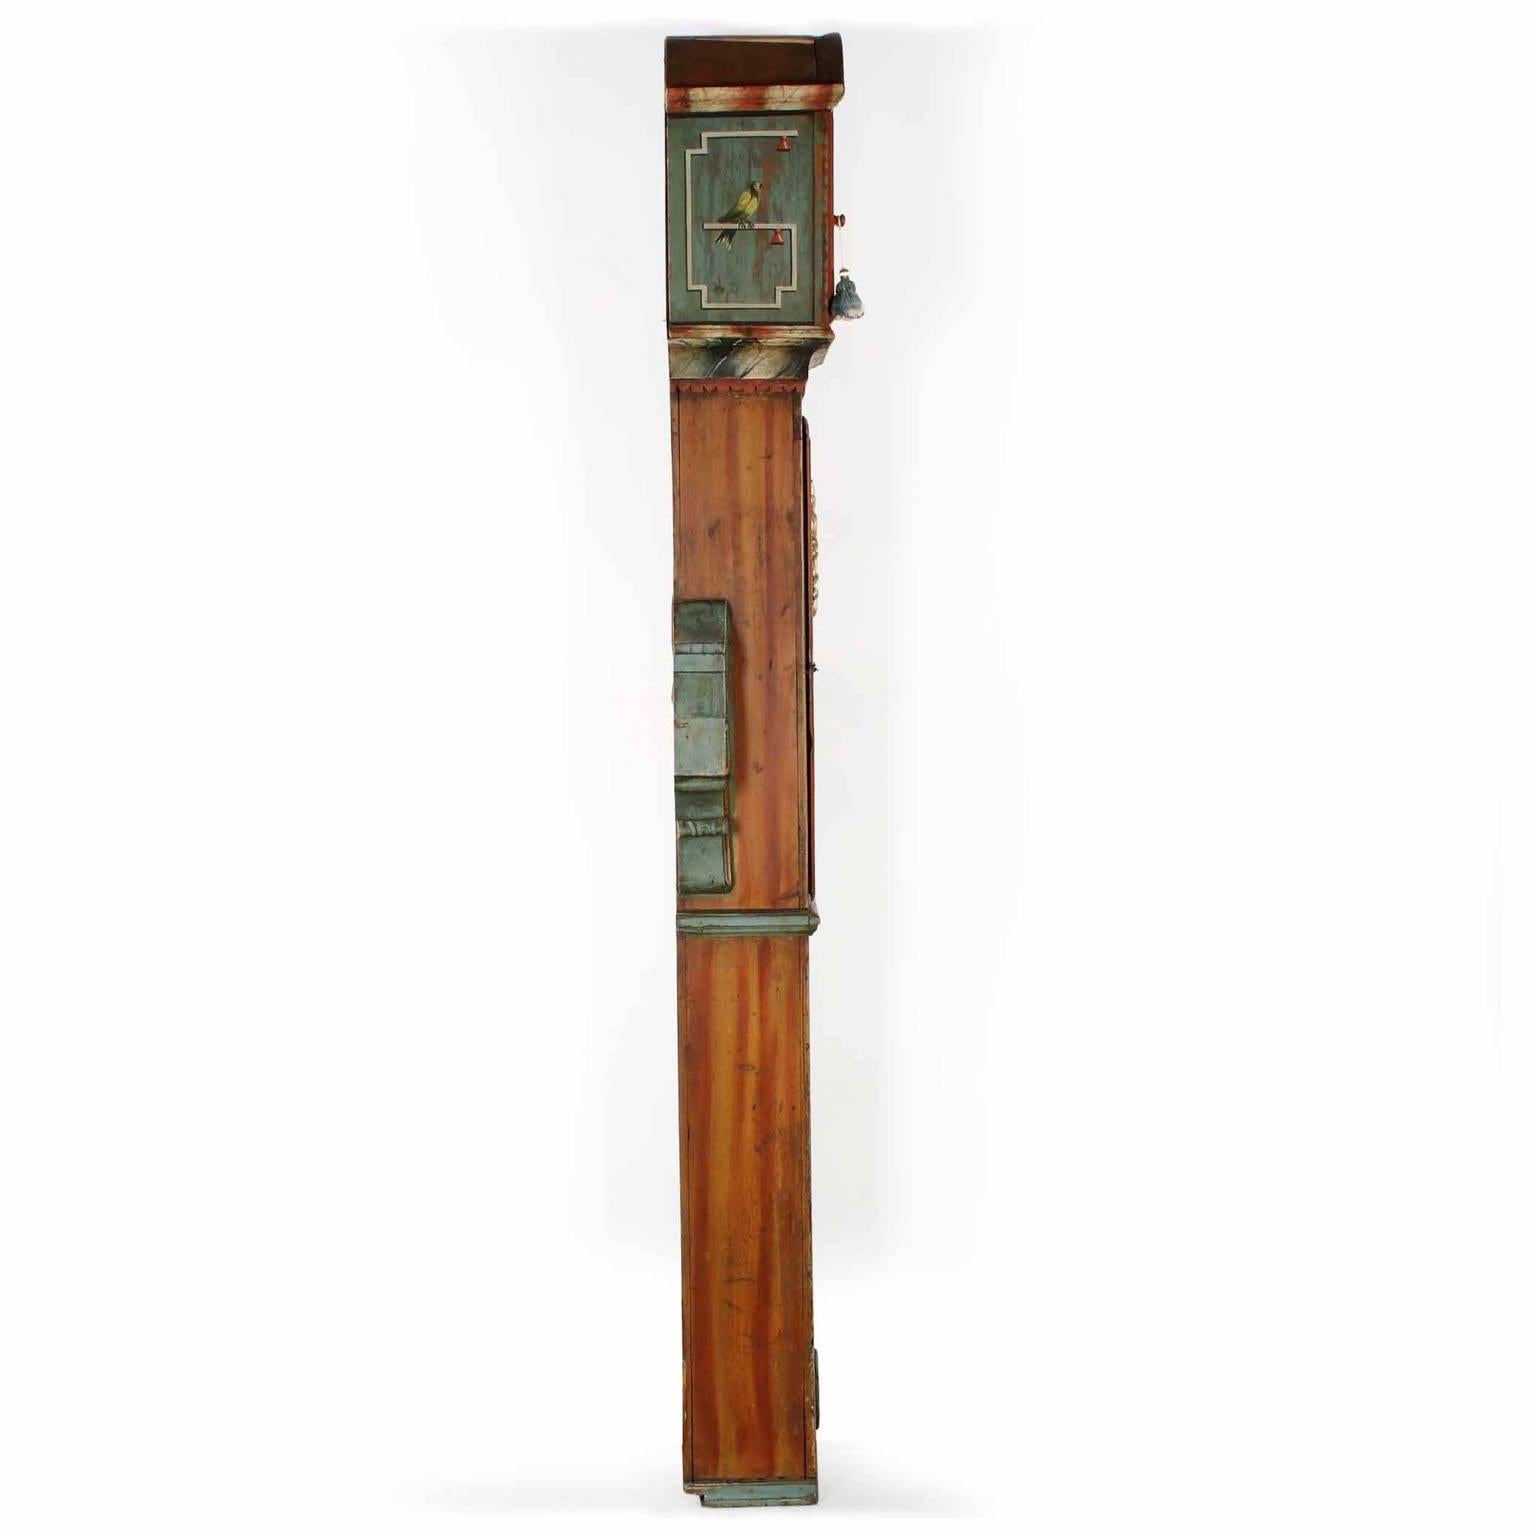 Hand-Painted Early 19th Century Painted and Carved Tall Case Mora Clock, probably Swedish